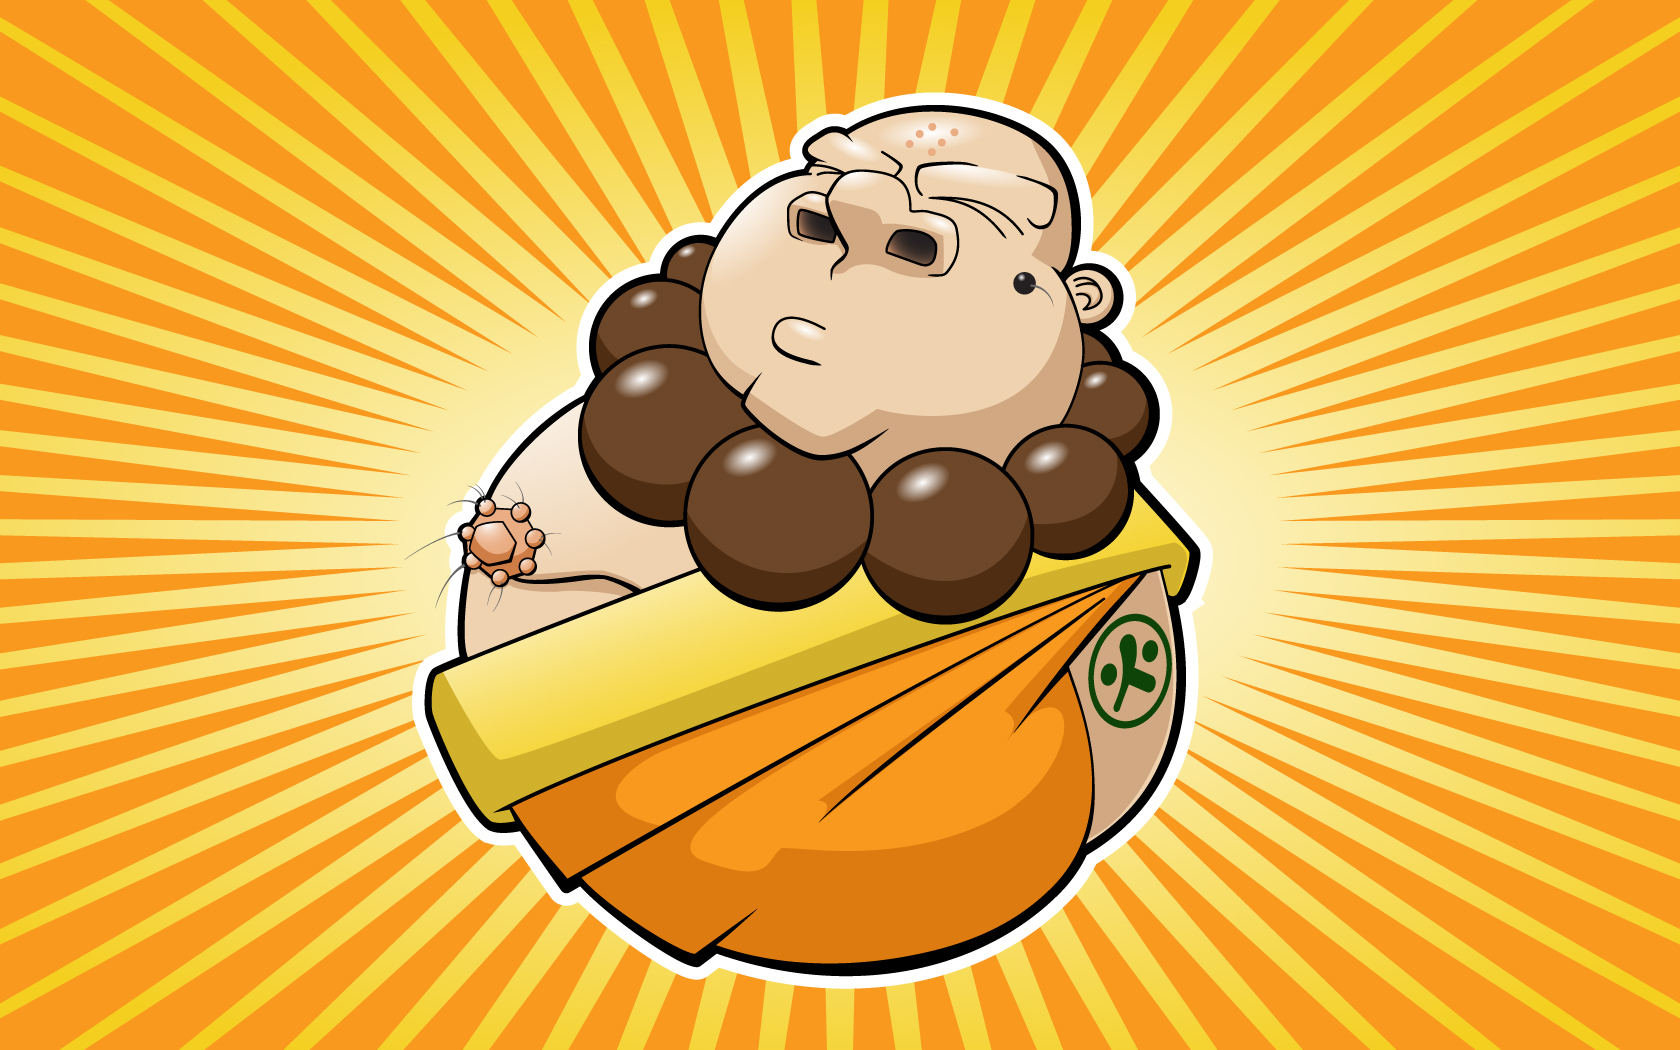 buddha easy to draw - Clip Art Library